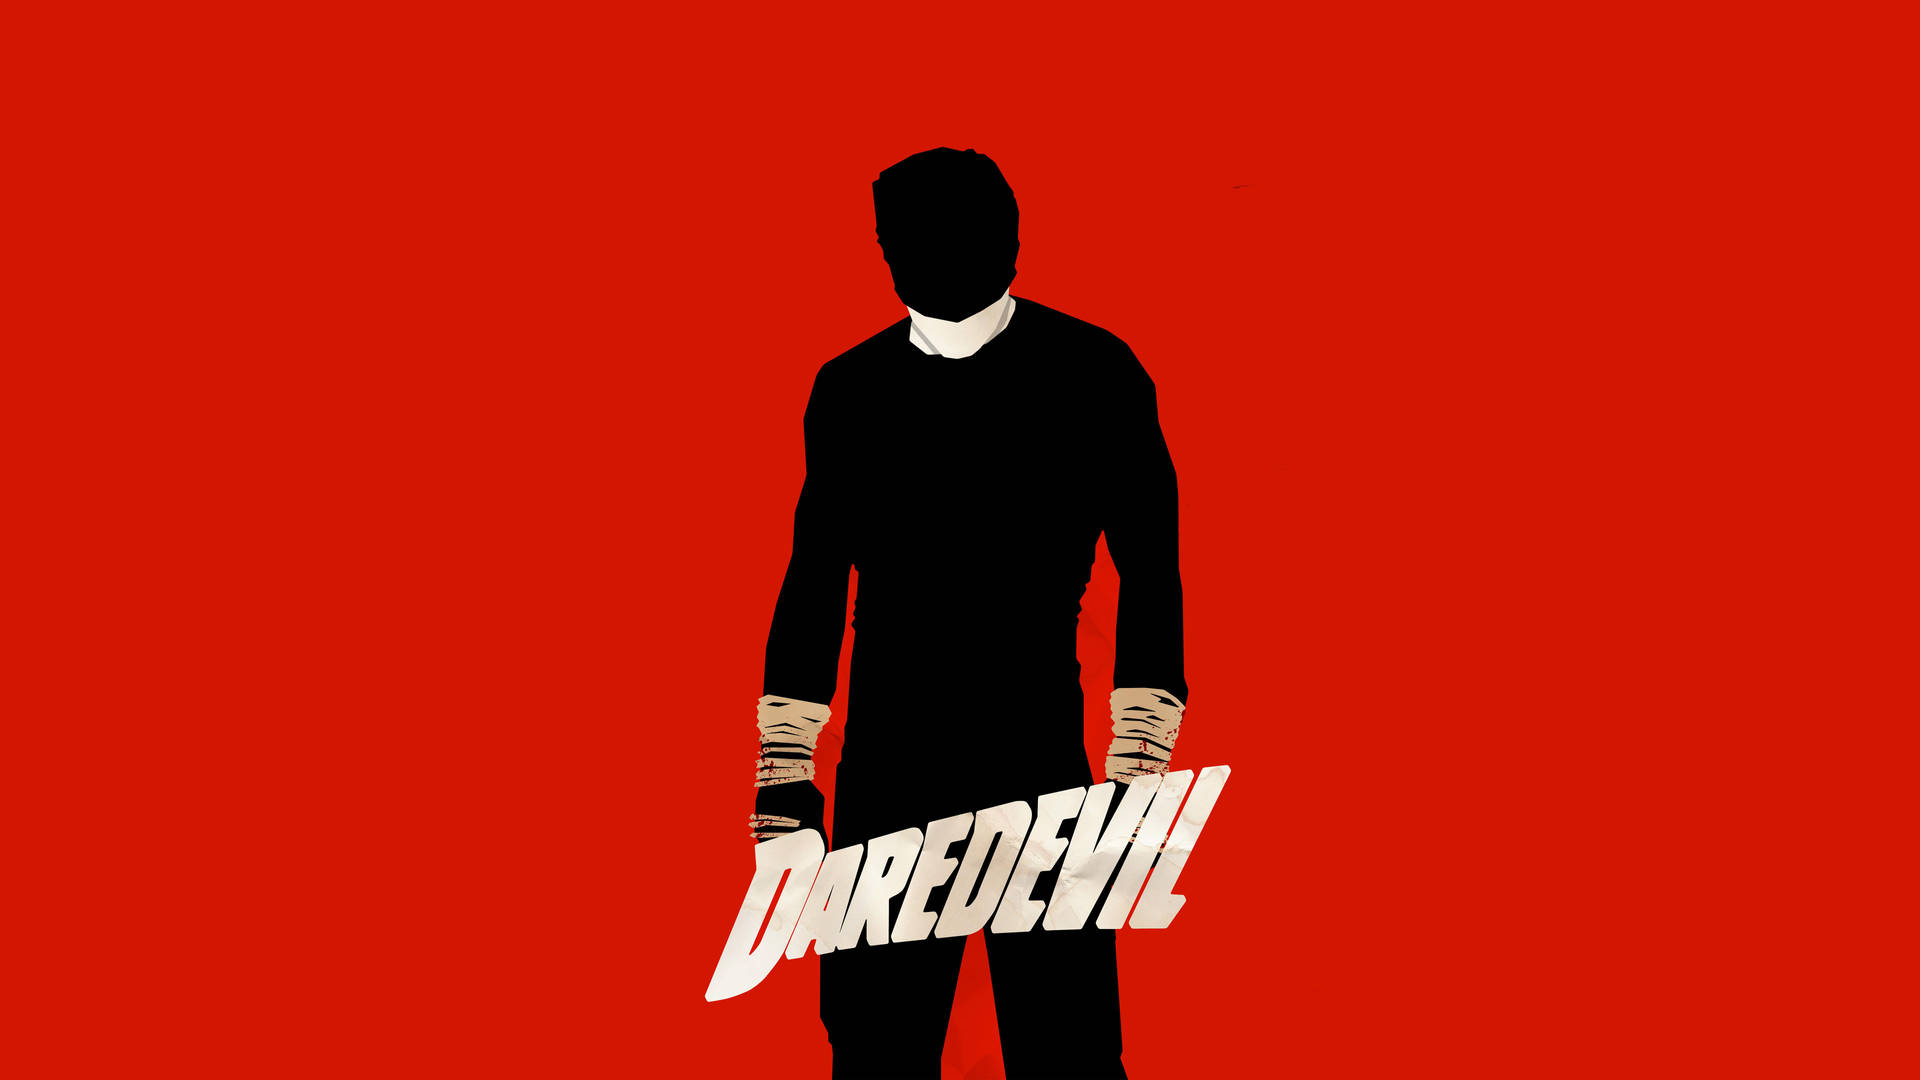 Simple Daredevil Abstract Logo Background